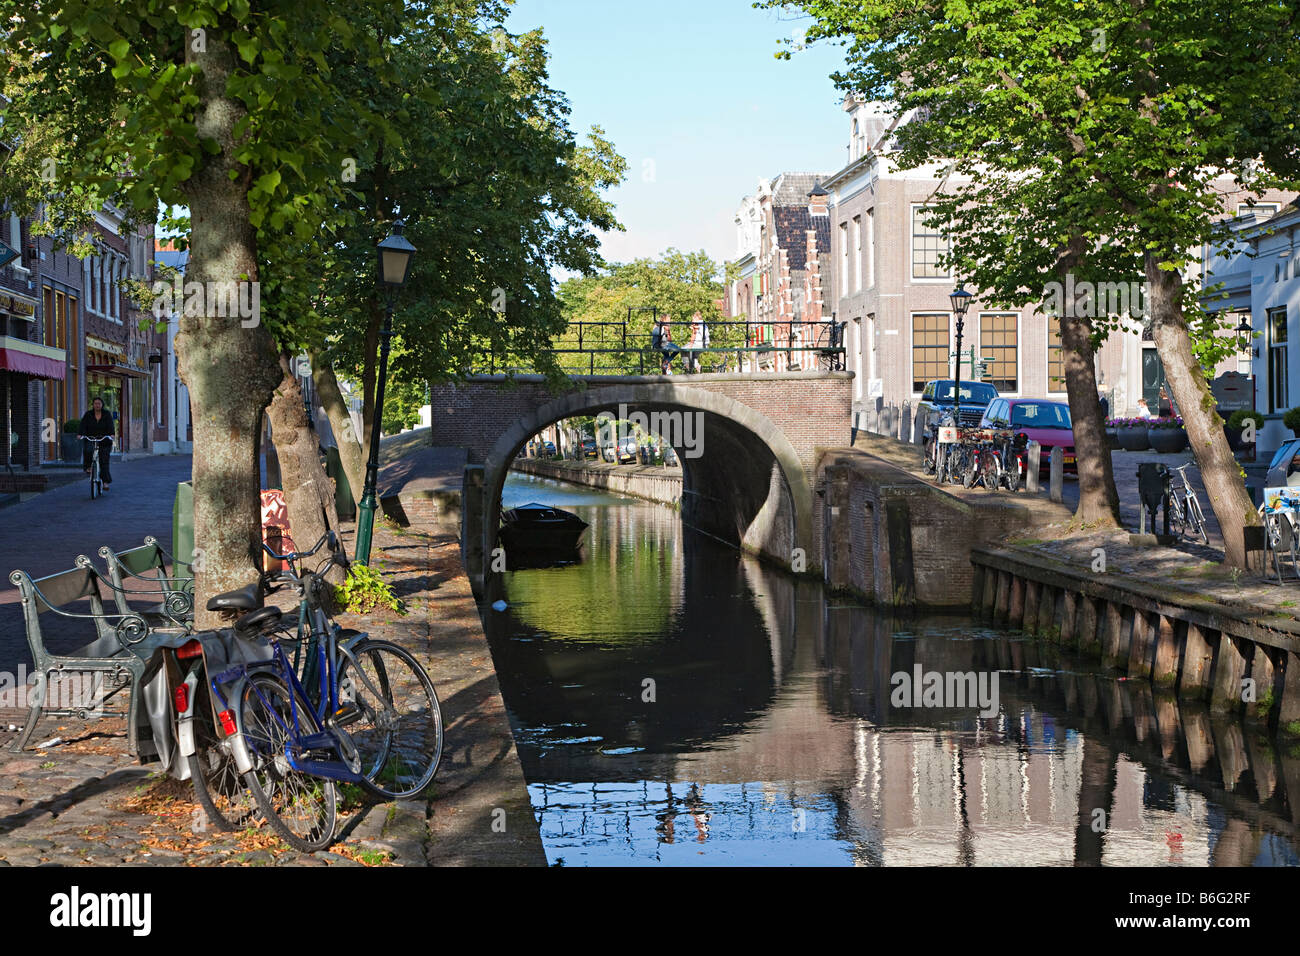 Bridge over canal in town centre of Edam Netherlands Stock Photo